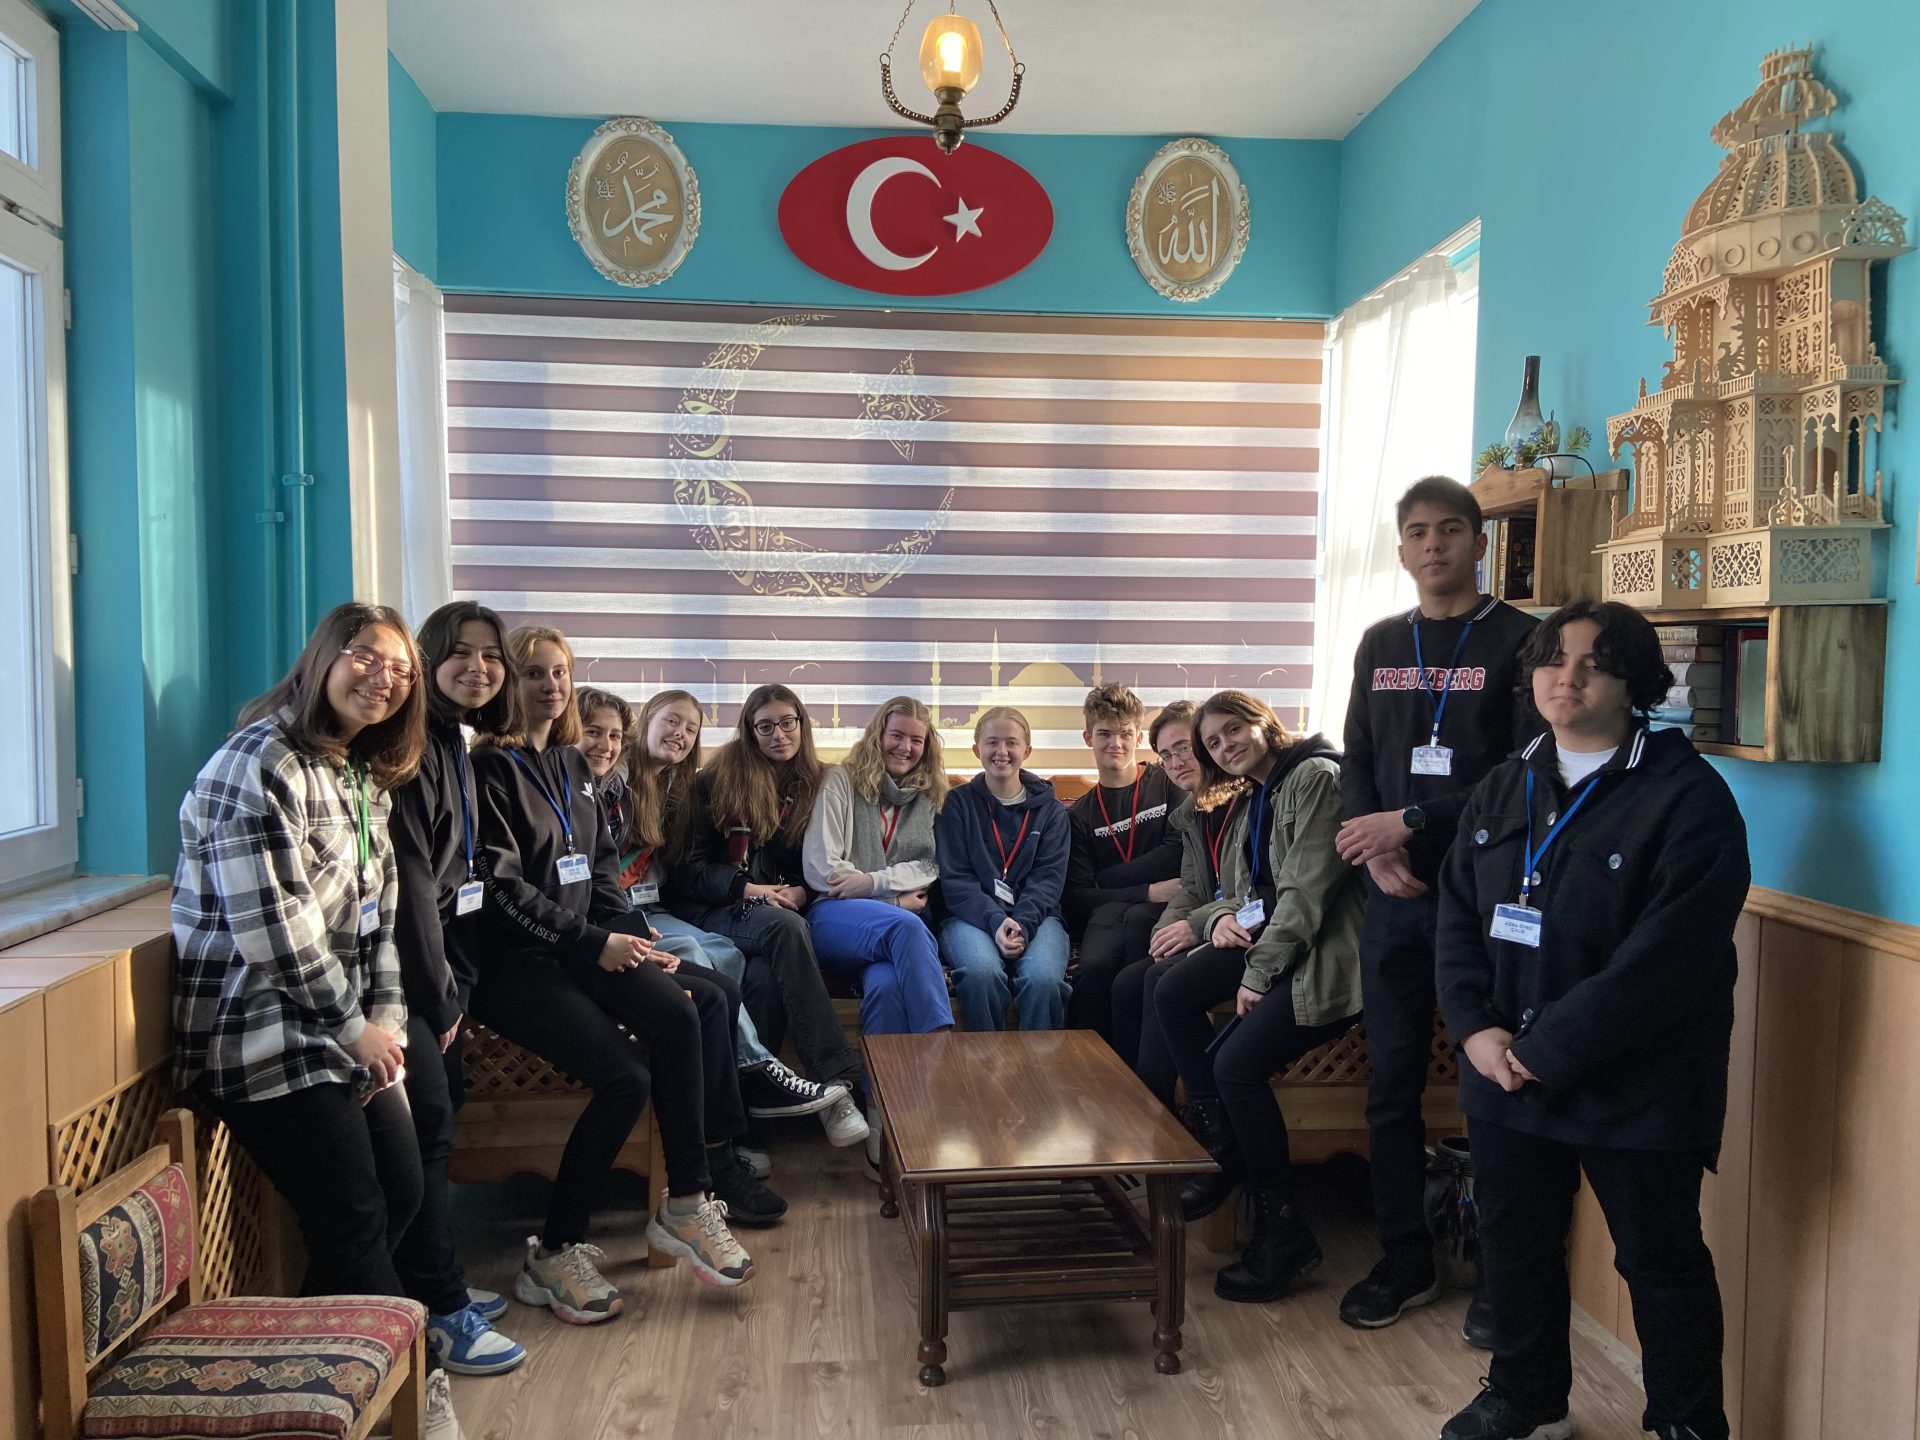 A group of young people (mostly sitting but 2 standing) posing for a photo in a room with blue walls a symbol of Turkey on the wall above them.